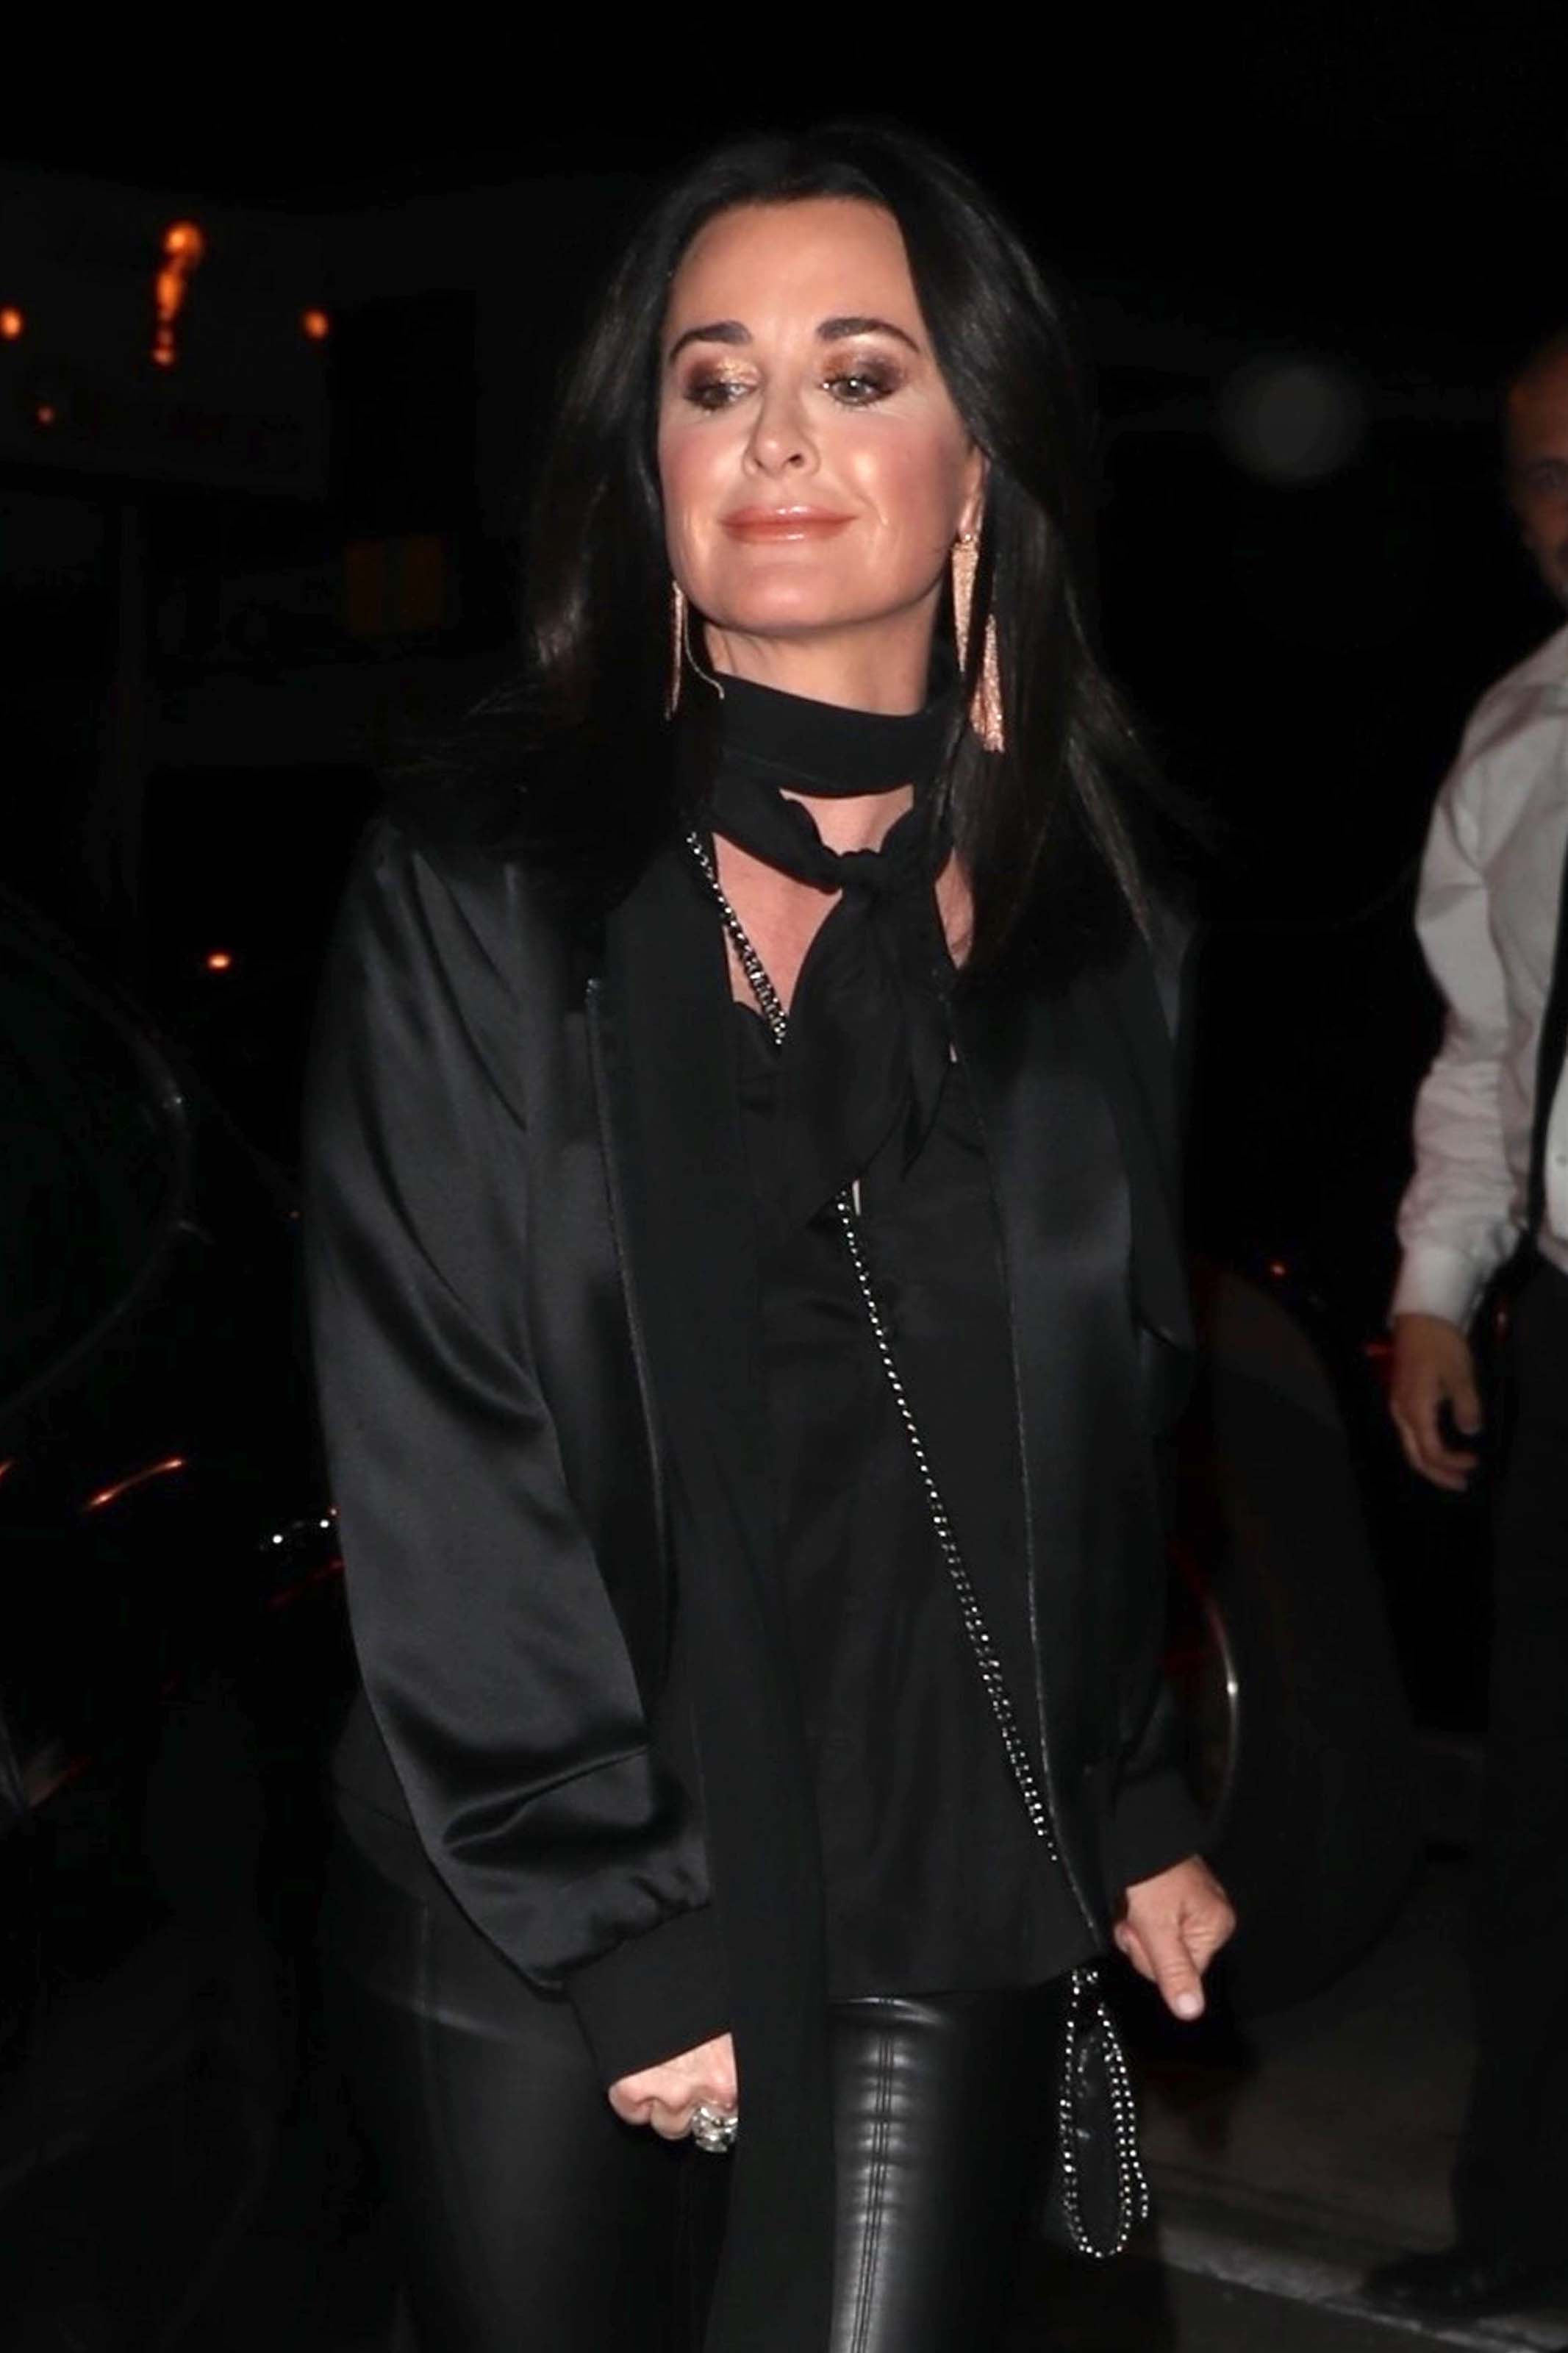 Kyle Richards at Craig’s in West Hollywood